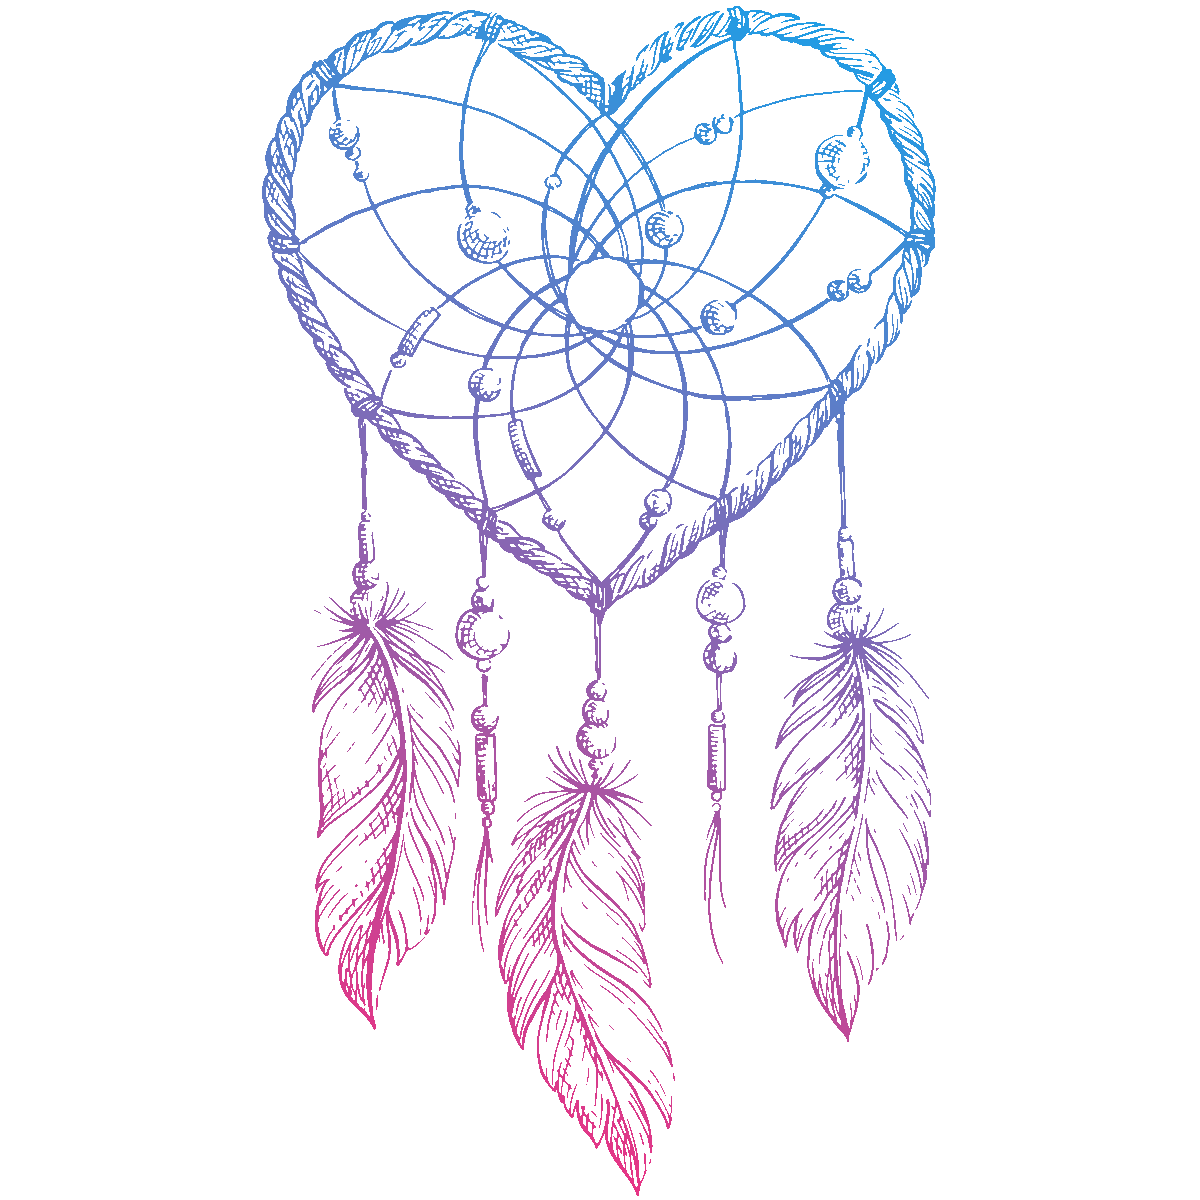 Drawing Dreamcatcher PNG Image High Quality PNG Image